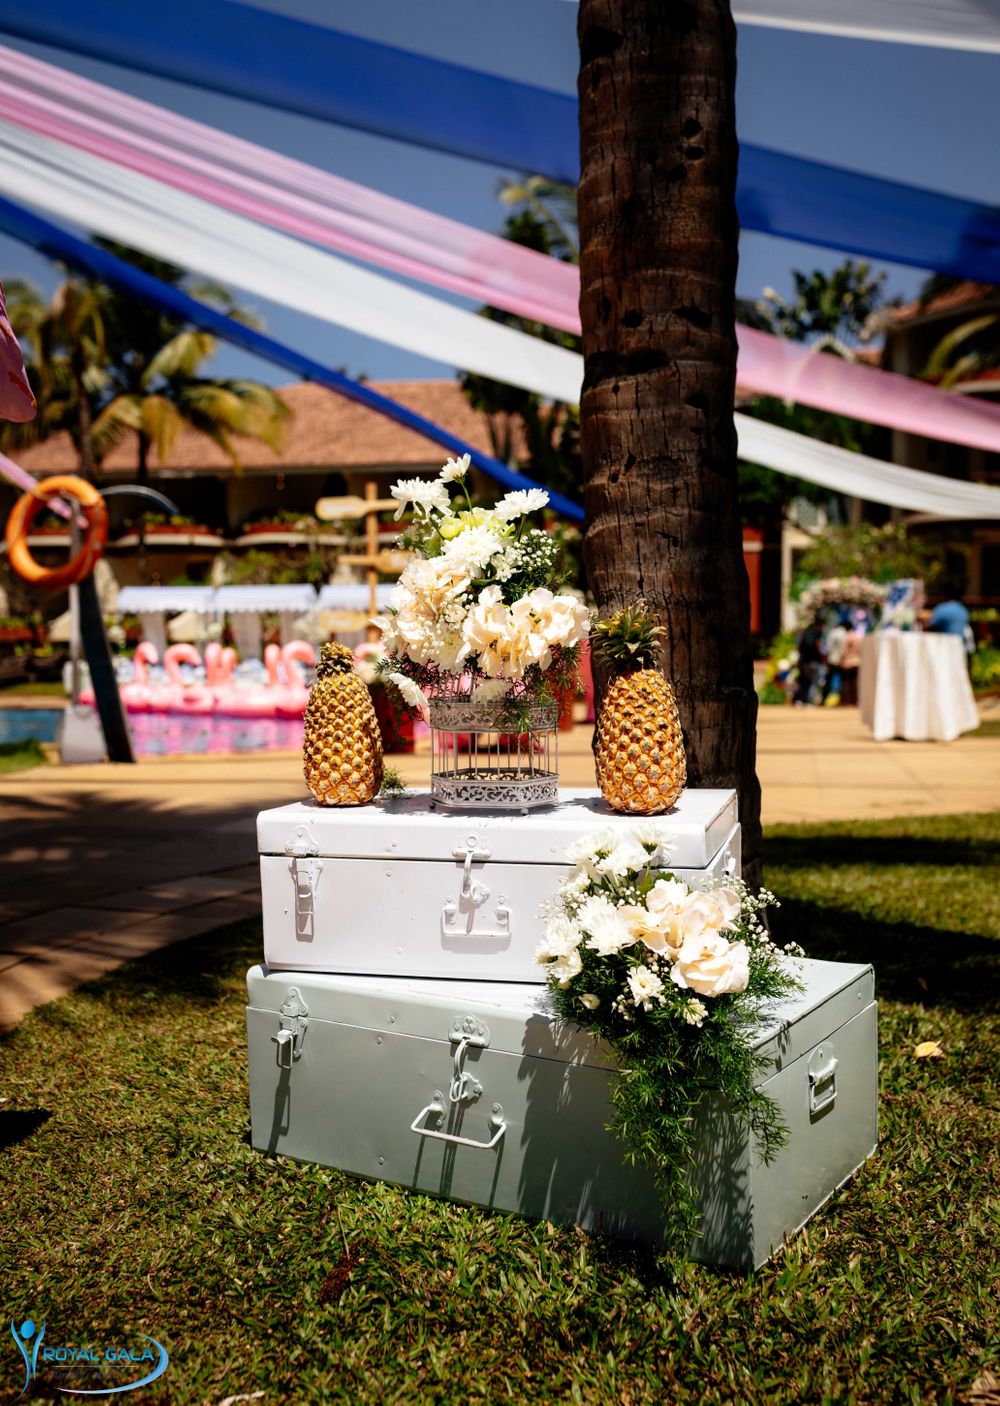 Photo of Hand-painted trunks with pineapple and flowers for a photobooth.